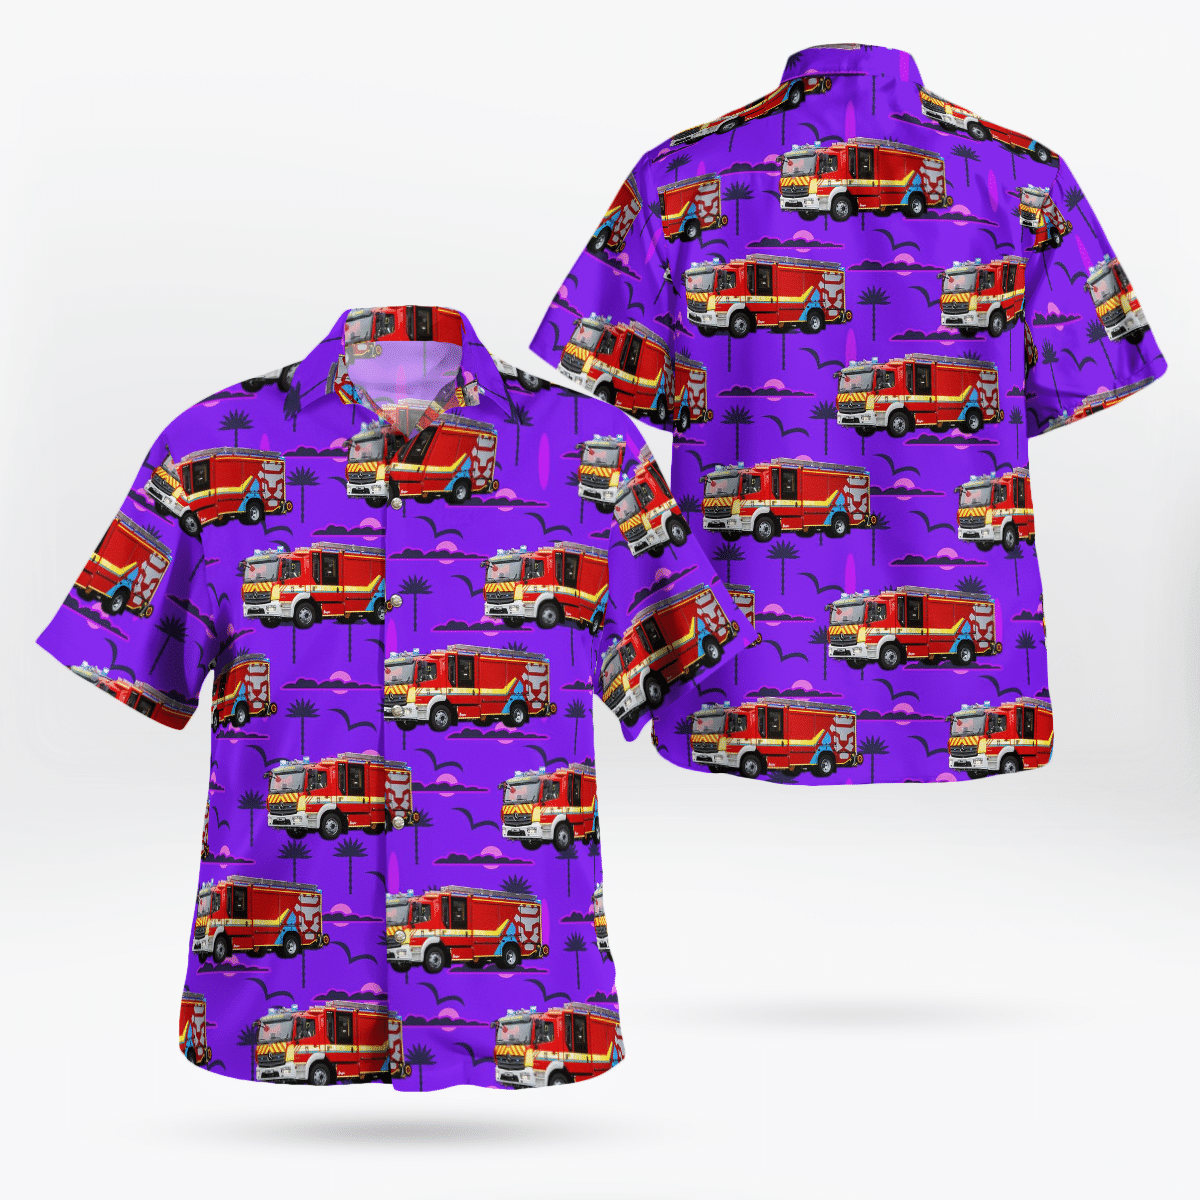 If you want to be noticed, wear These Trendy Hawaiian Shirt 98